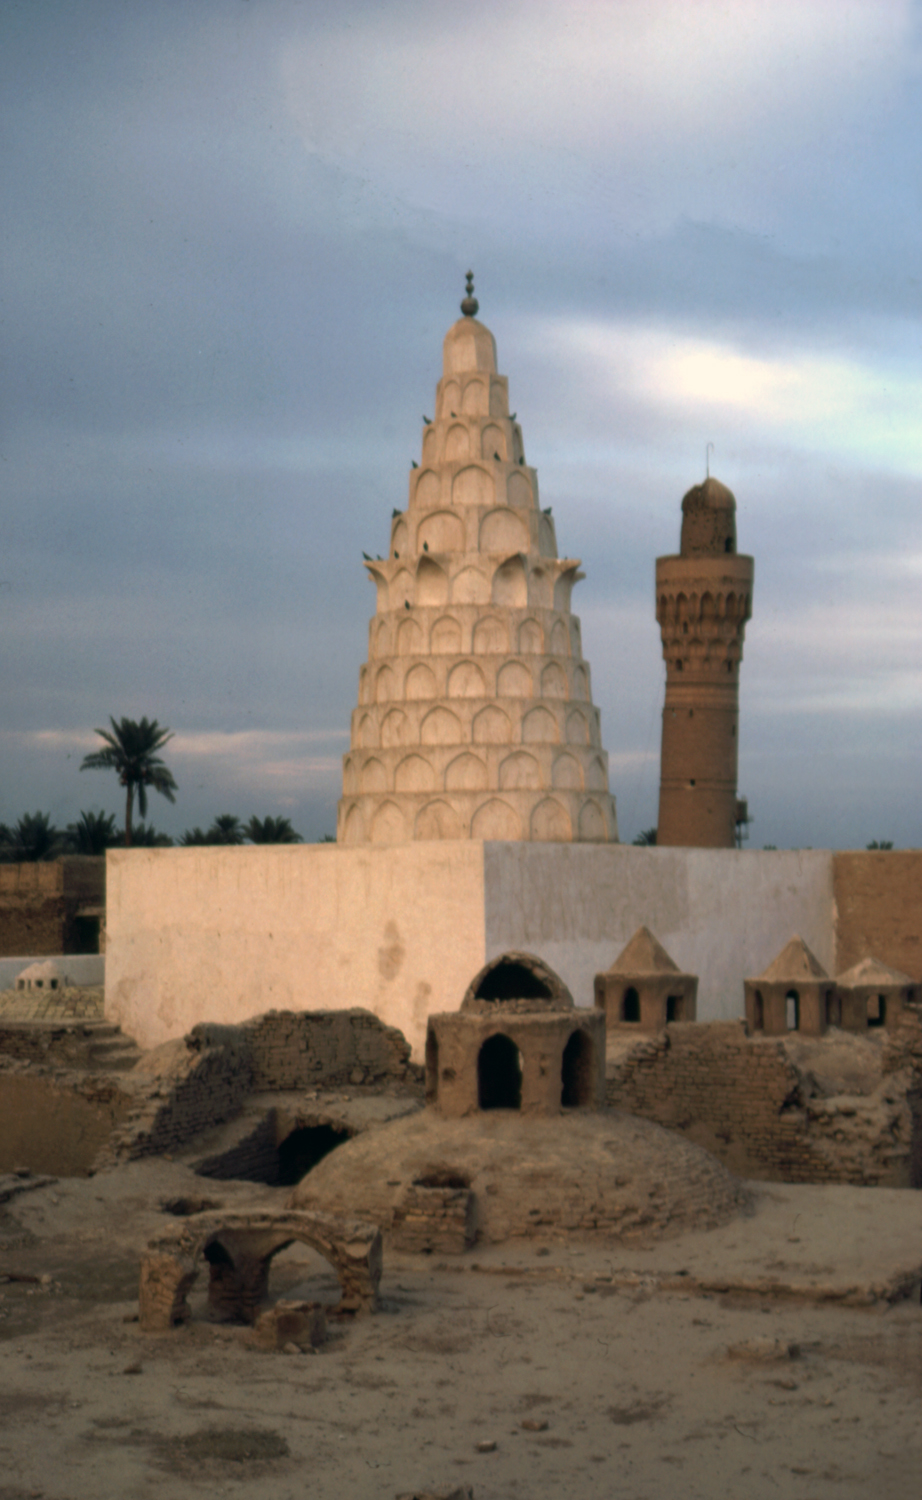 Darih Dhi al-Kifl - General view of the shrine with minaret of adjoining mosque in background